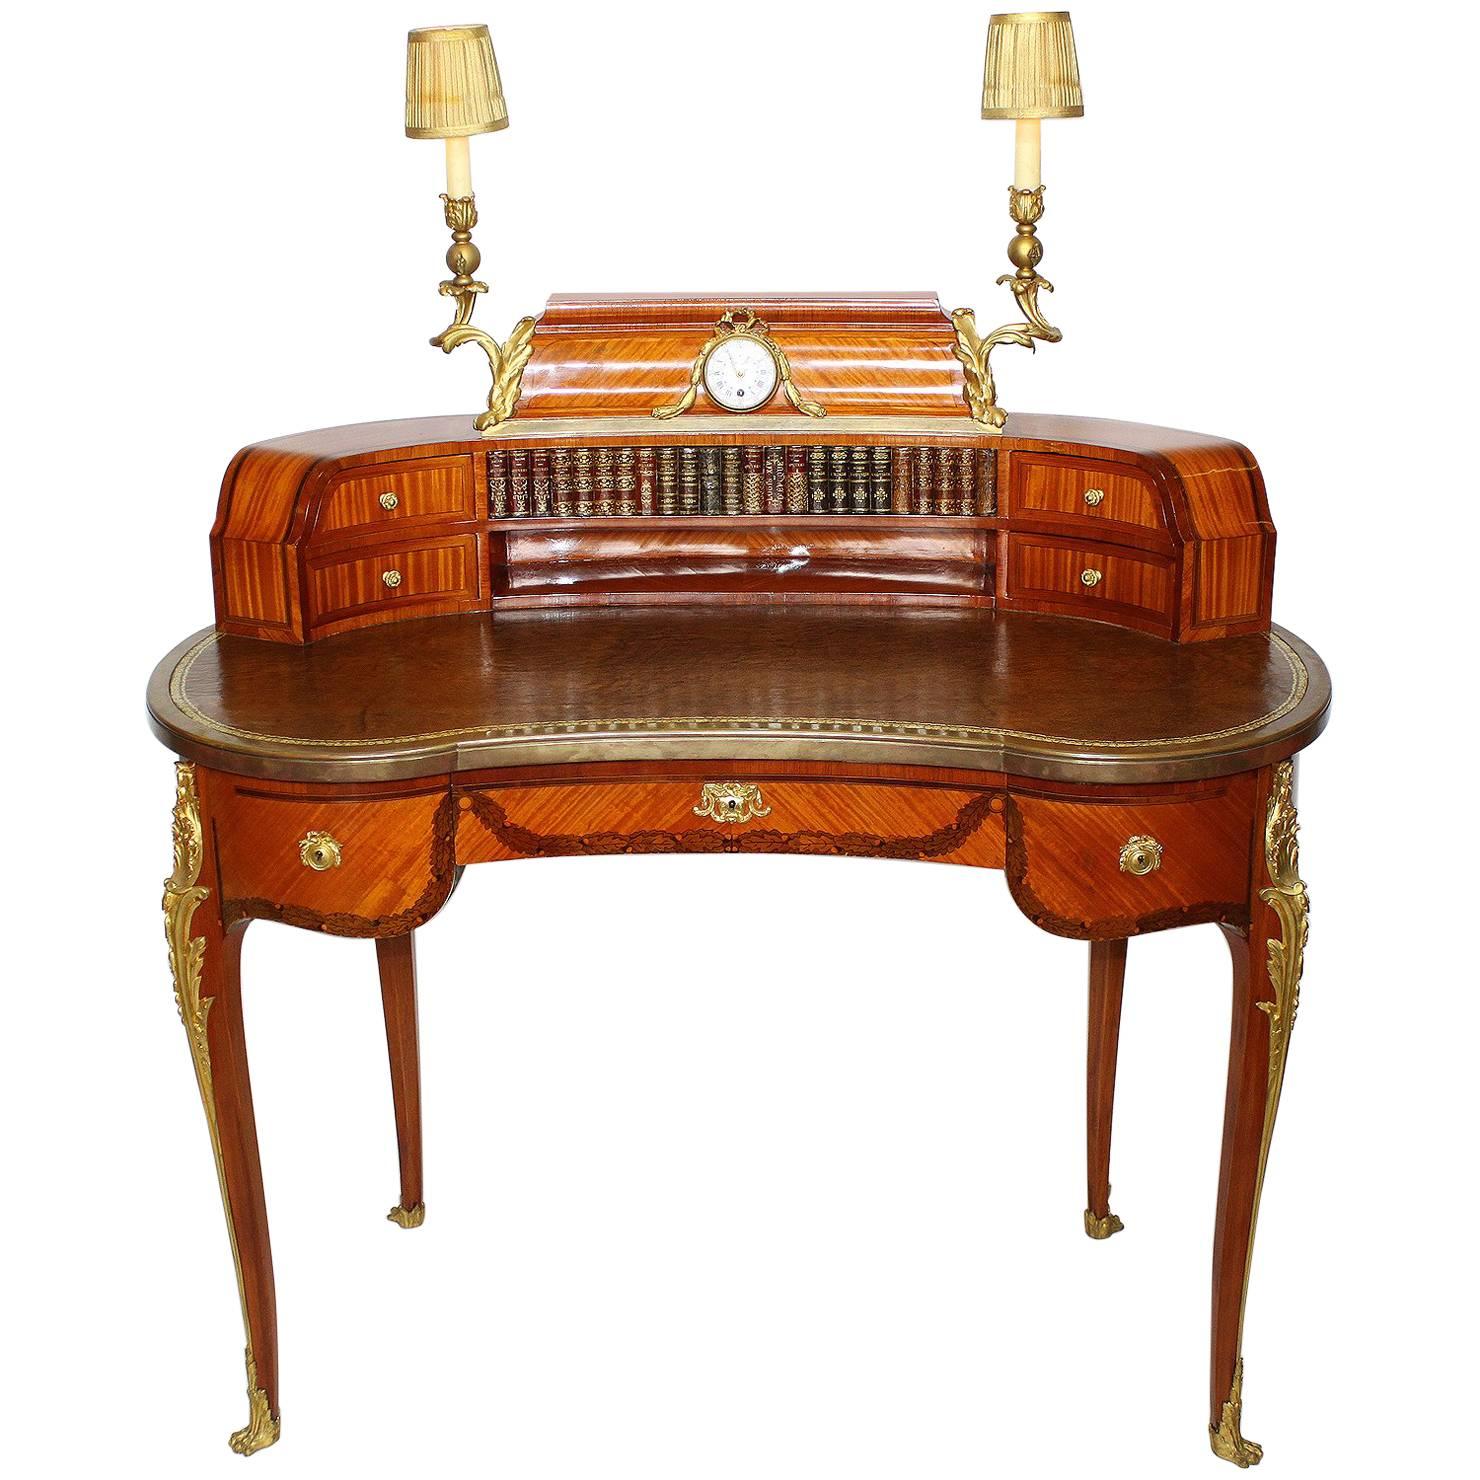 Fine French 19th Century Louis XV Style Tulipwood and Ormolu-Mounted Ladies Desk For Sale